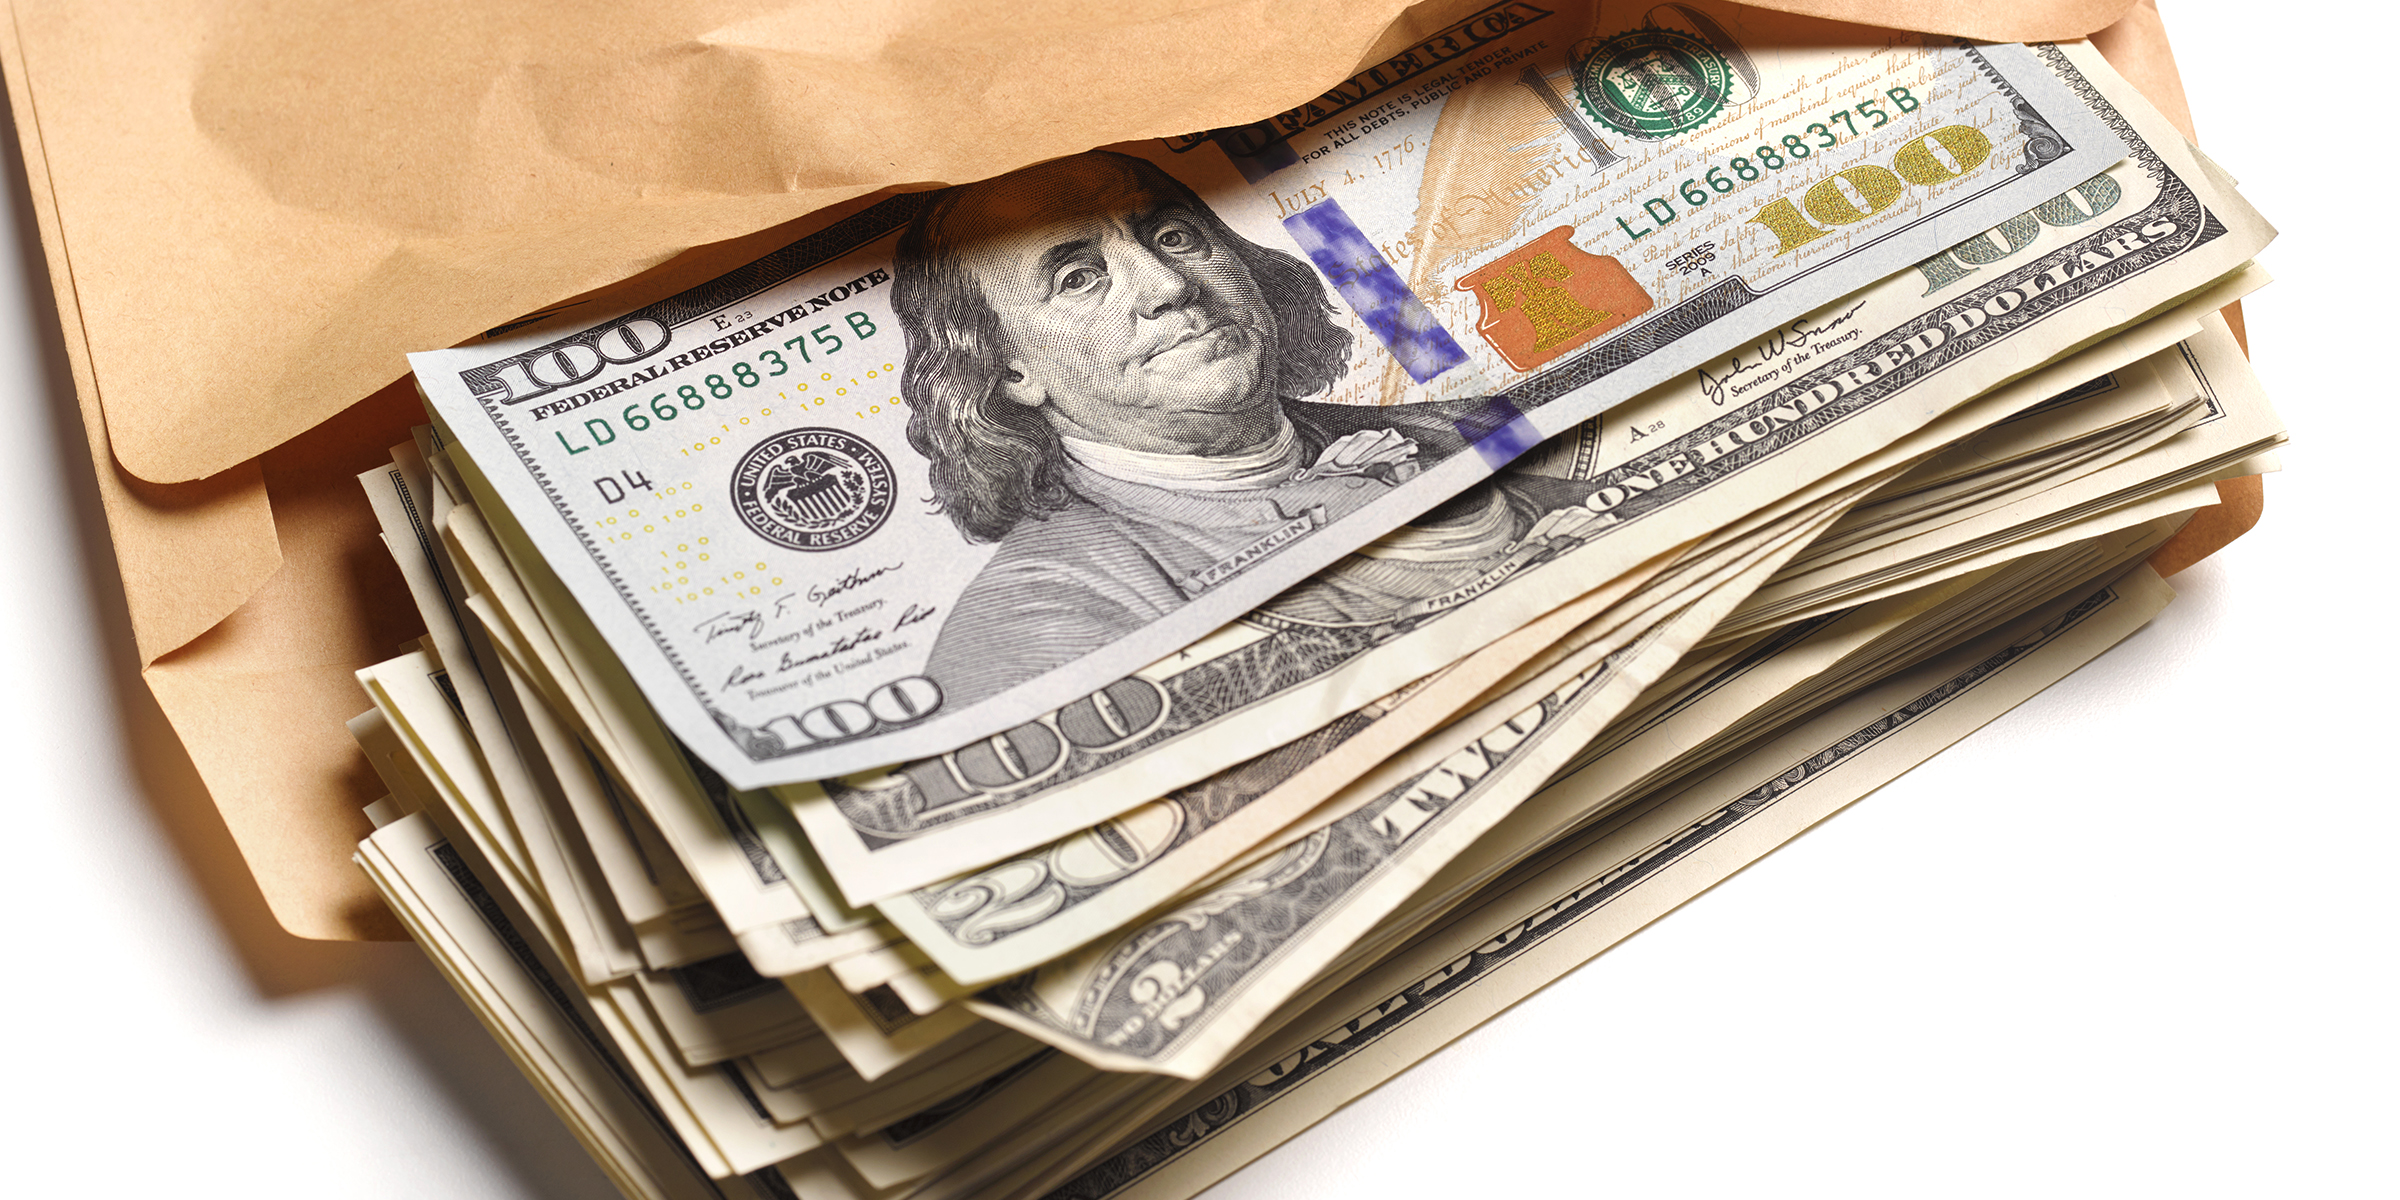 An envelope filled with dollar bills | Source: Getty Images